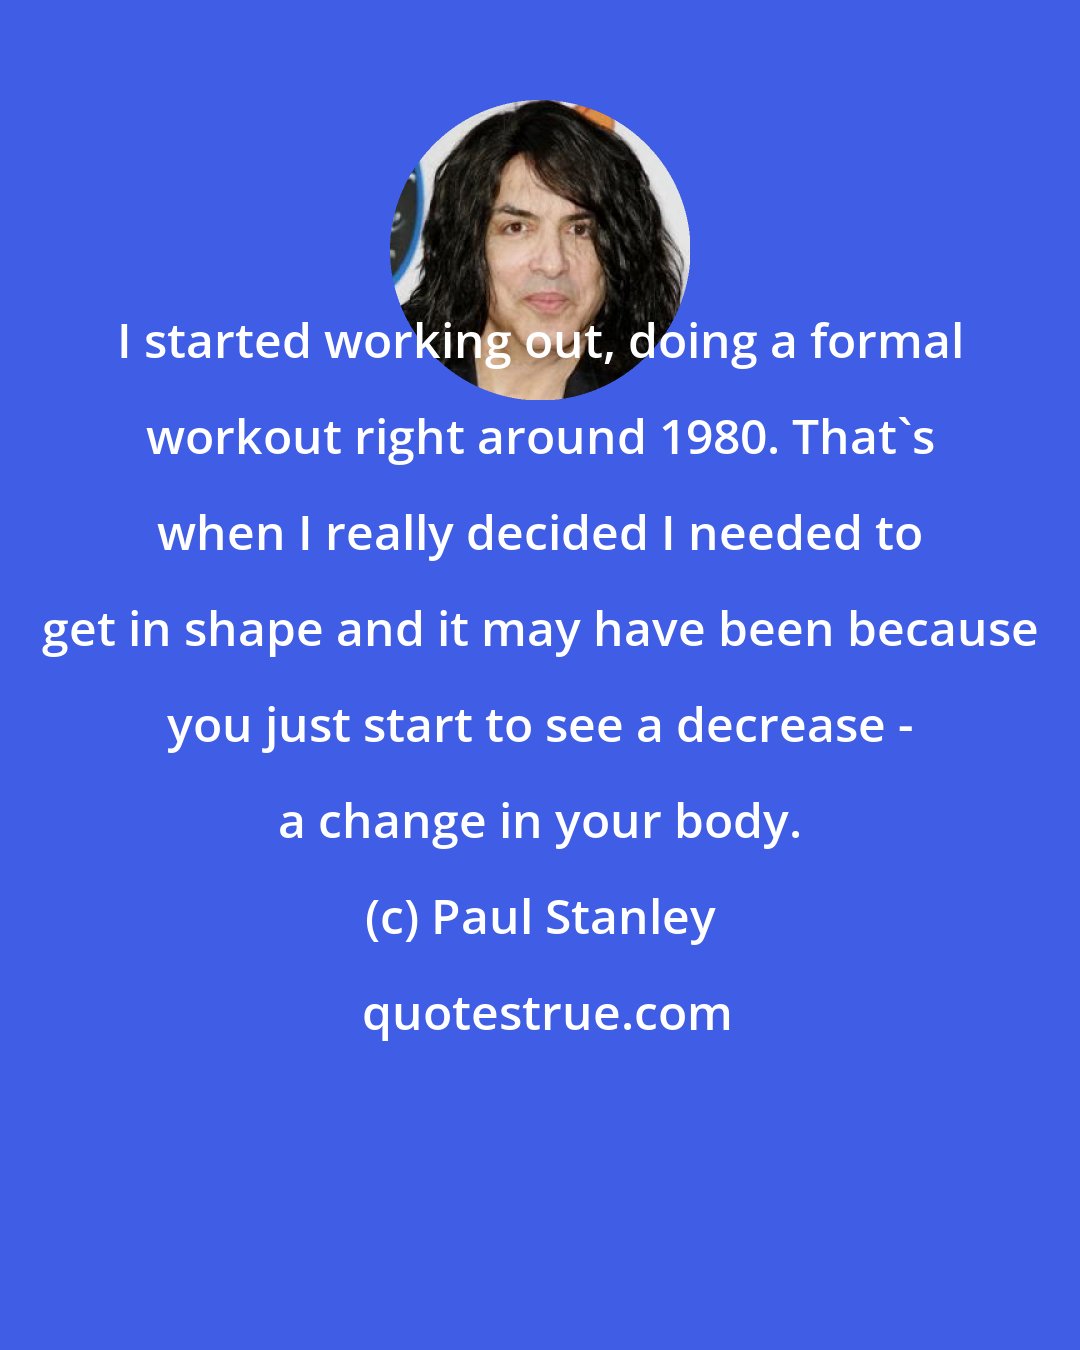 Paul Stanley: I started working out, doing a formal workout right around 1980. That's when I really decided I needed to get in shape and it may have been because you just start to see a decrease - a change in your body.